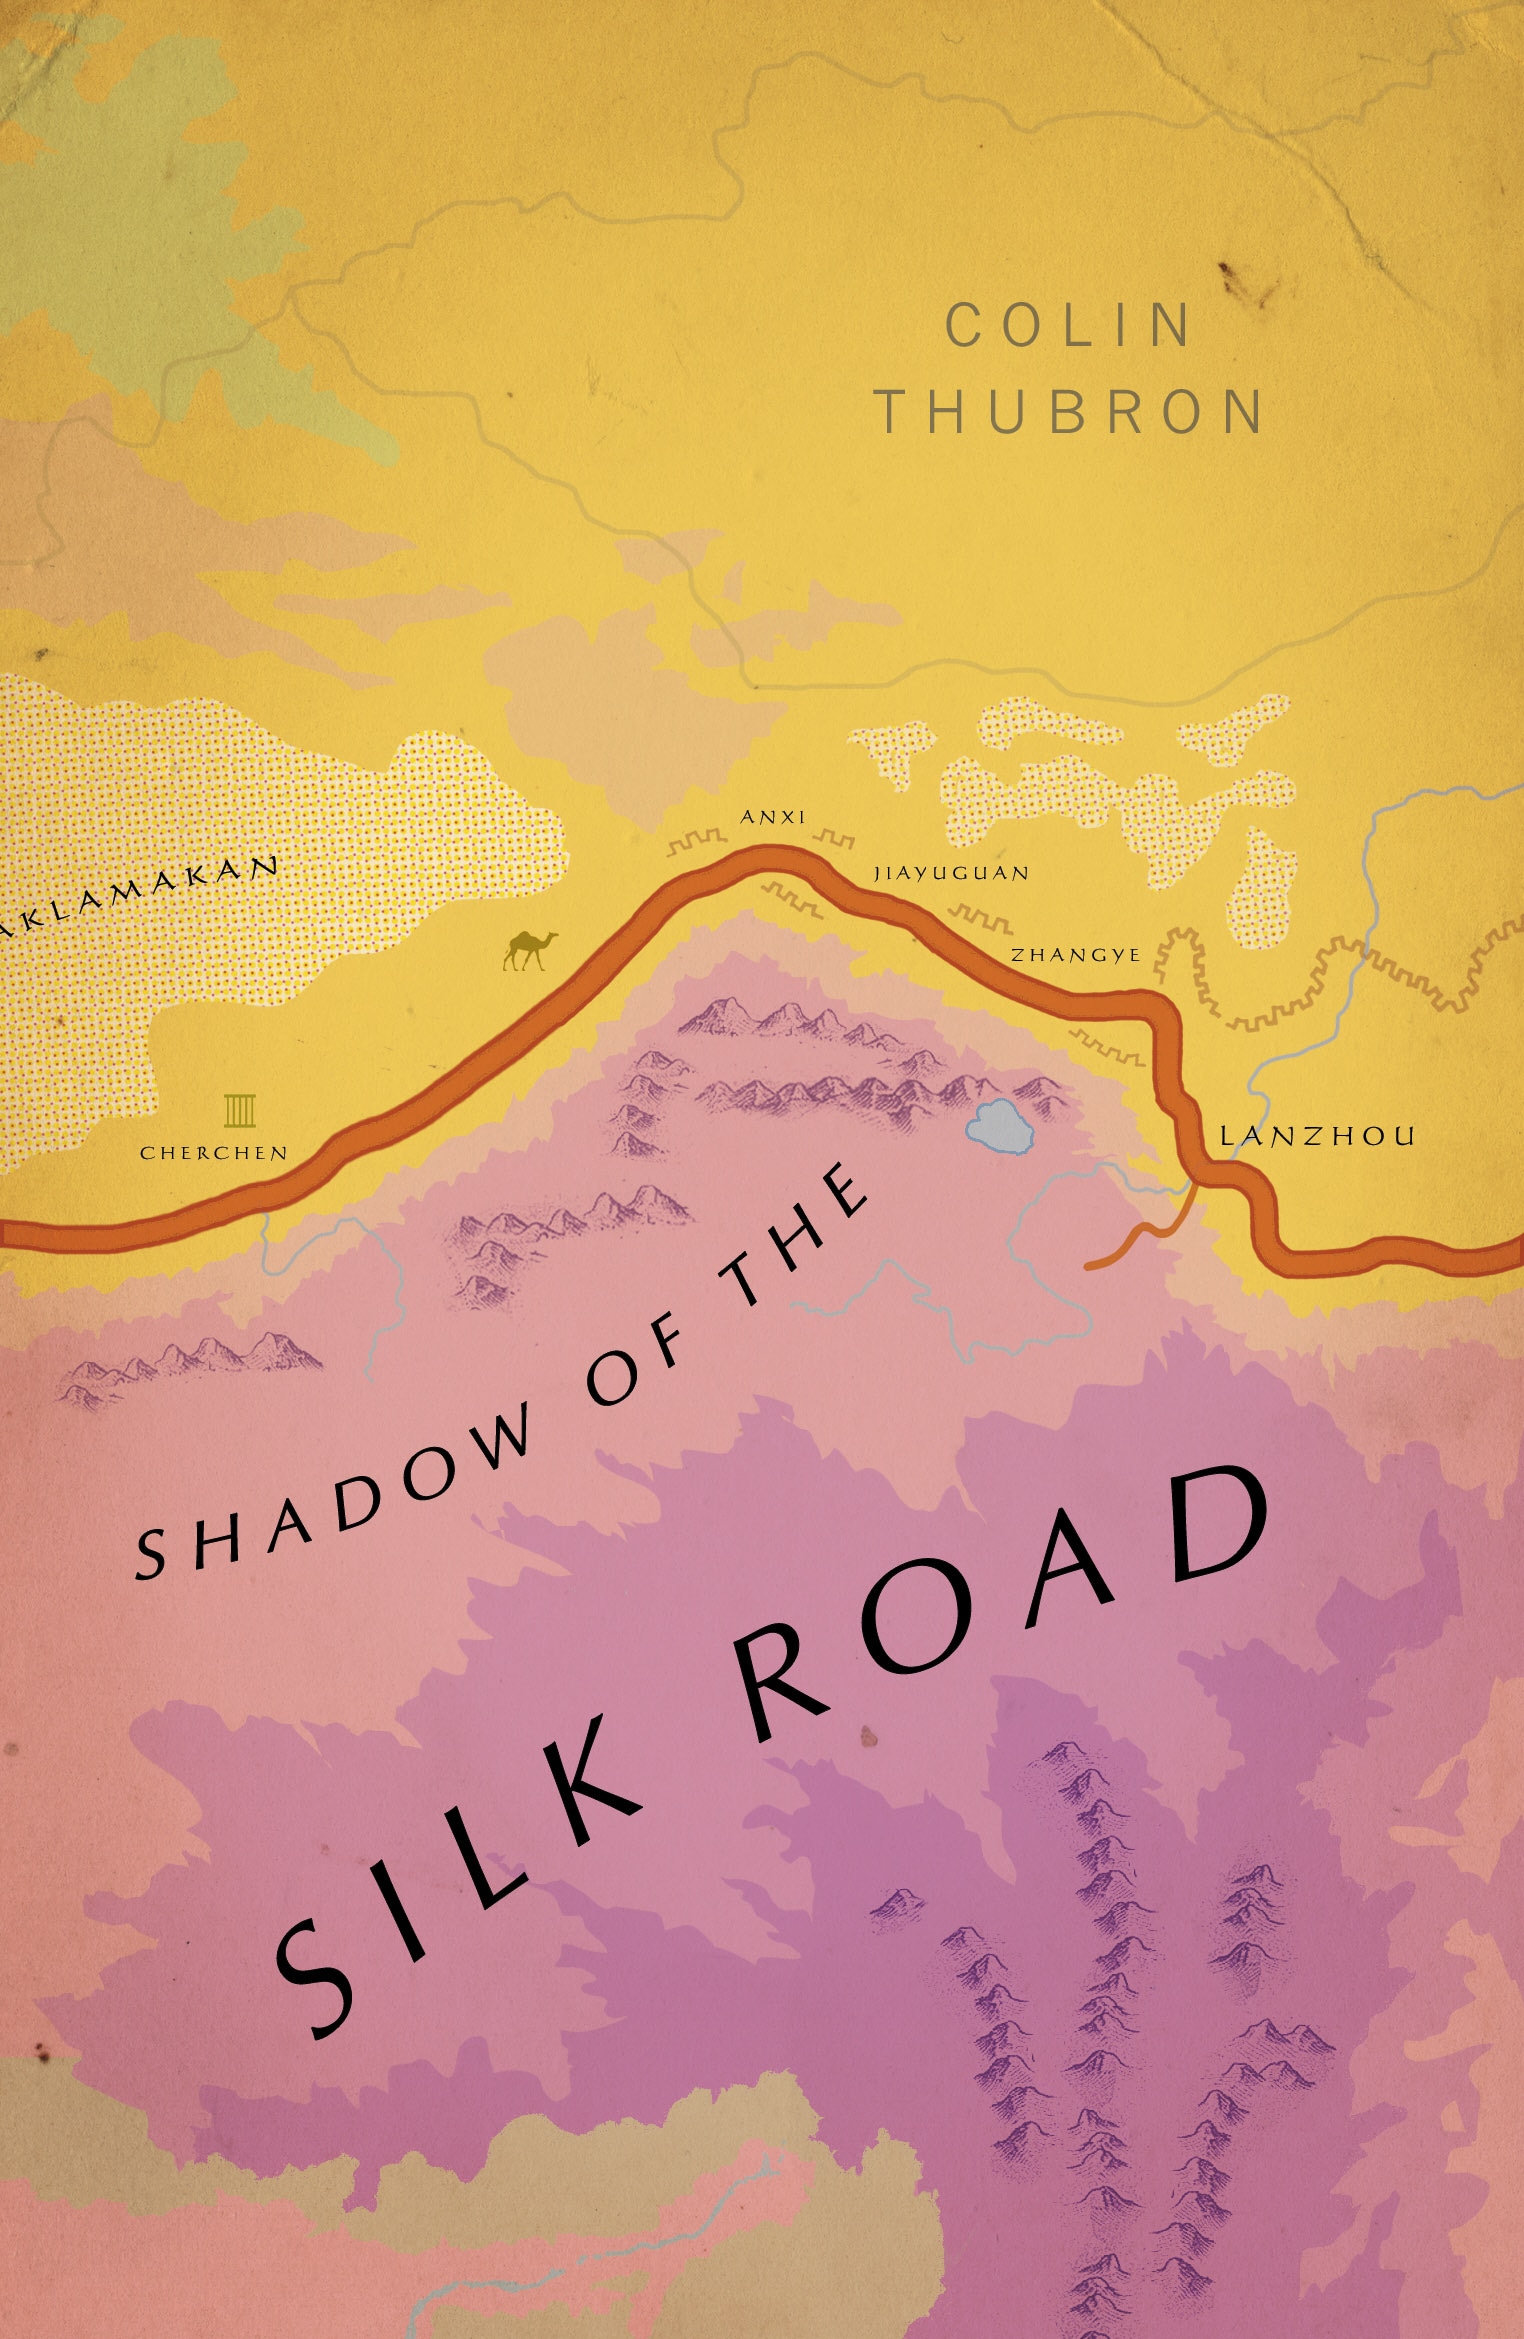 Book “Shadow of the Silk Road” by Colin Thubron — June 6, 2019